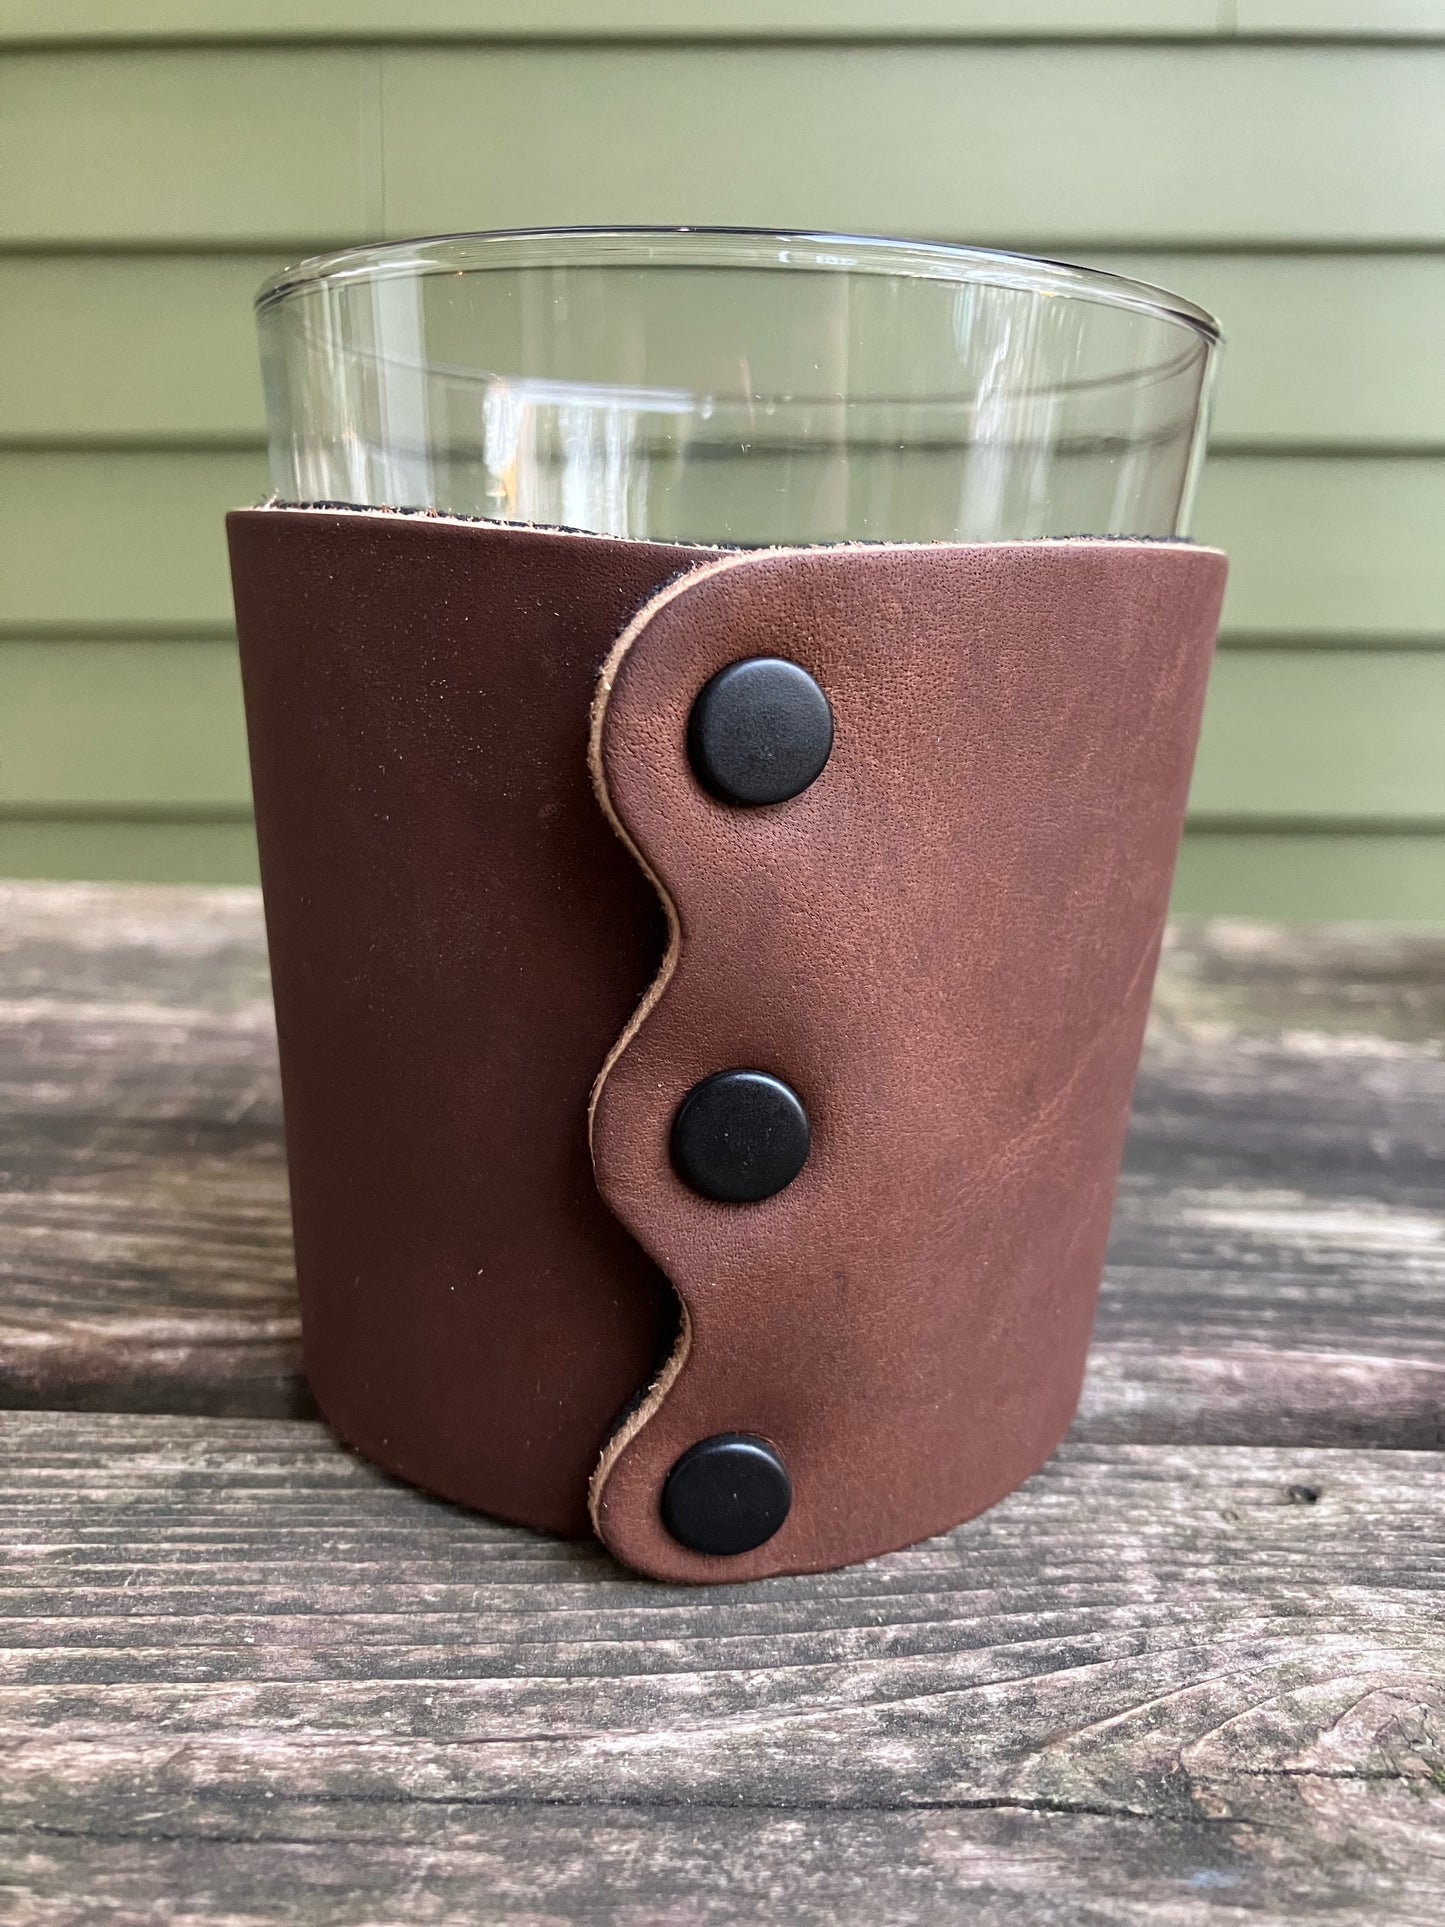 Leather Wrapped Whiskey Glass - Texas Star